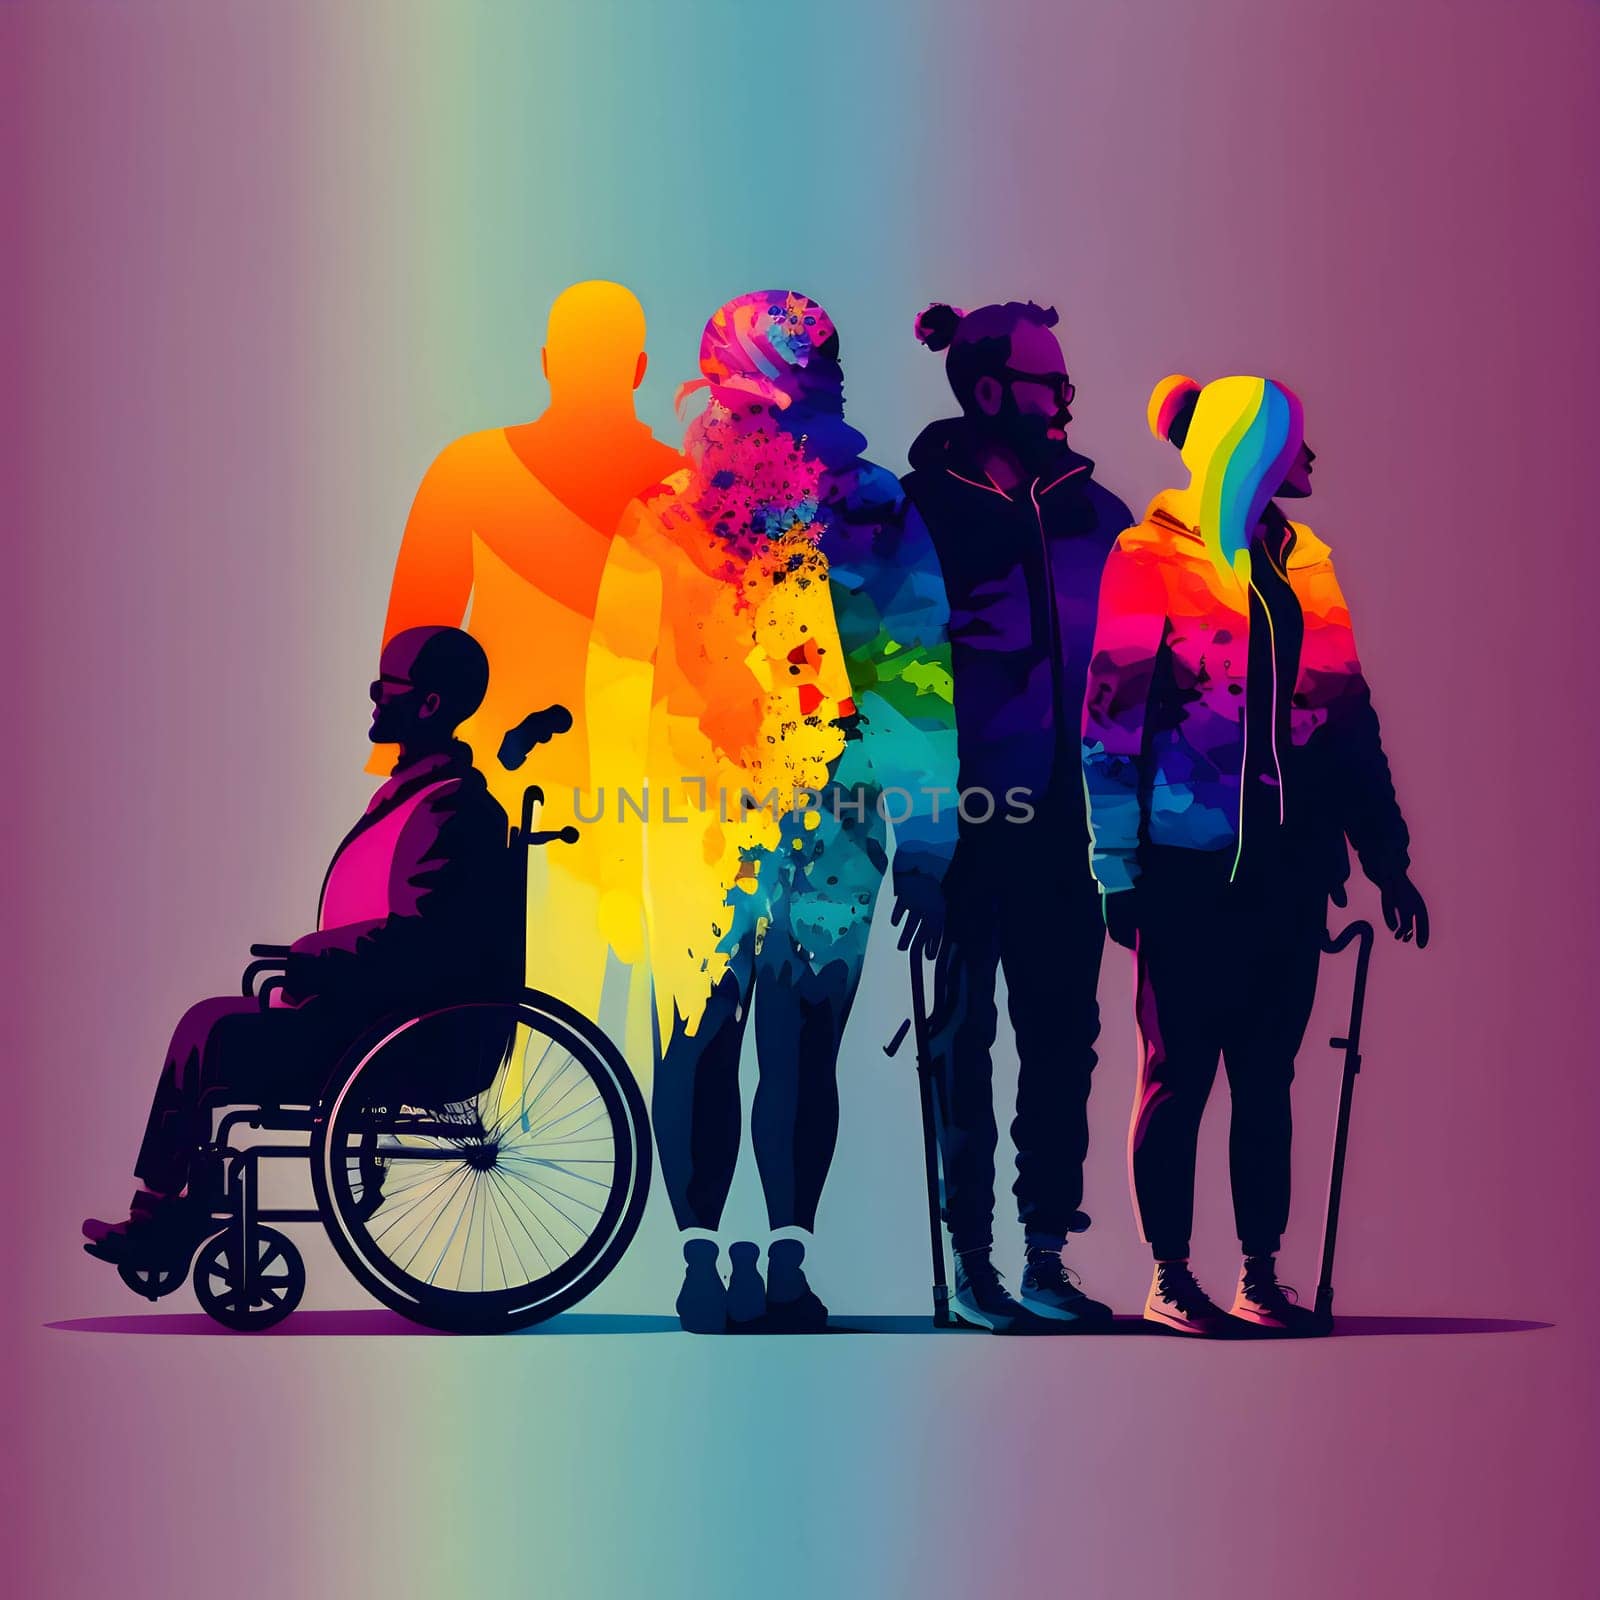 Logo concept: Five human silhouettes in vibrant LGBT rainbow colors, representing inclusivity, diversity, and equality.